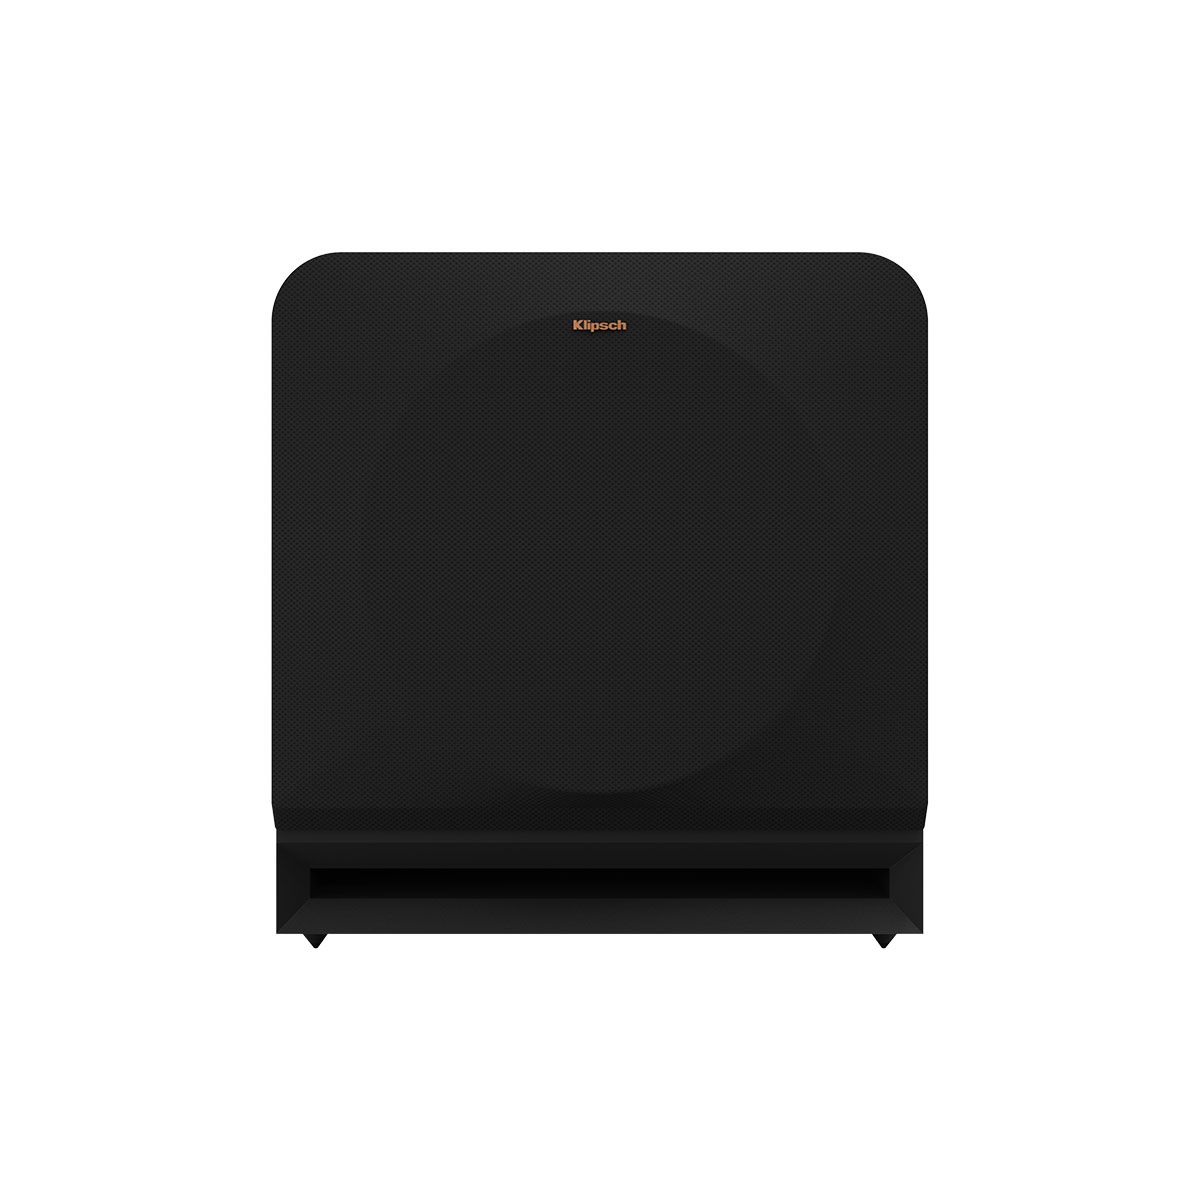 Klipsch RP-1000SW 10" Powered Subwoofer - Ebony - front view with grille